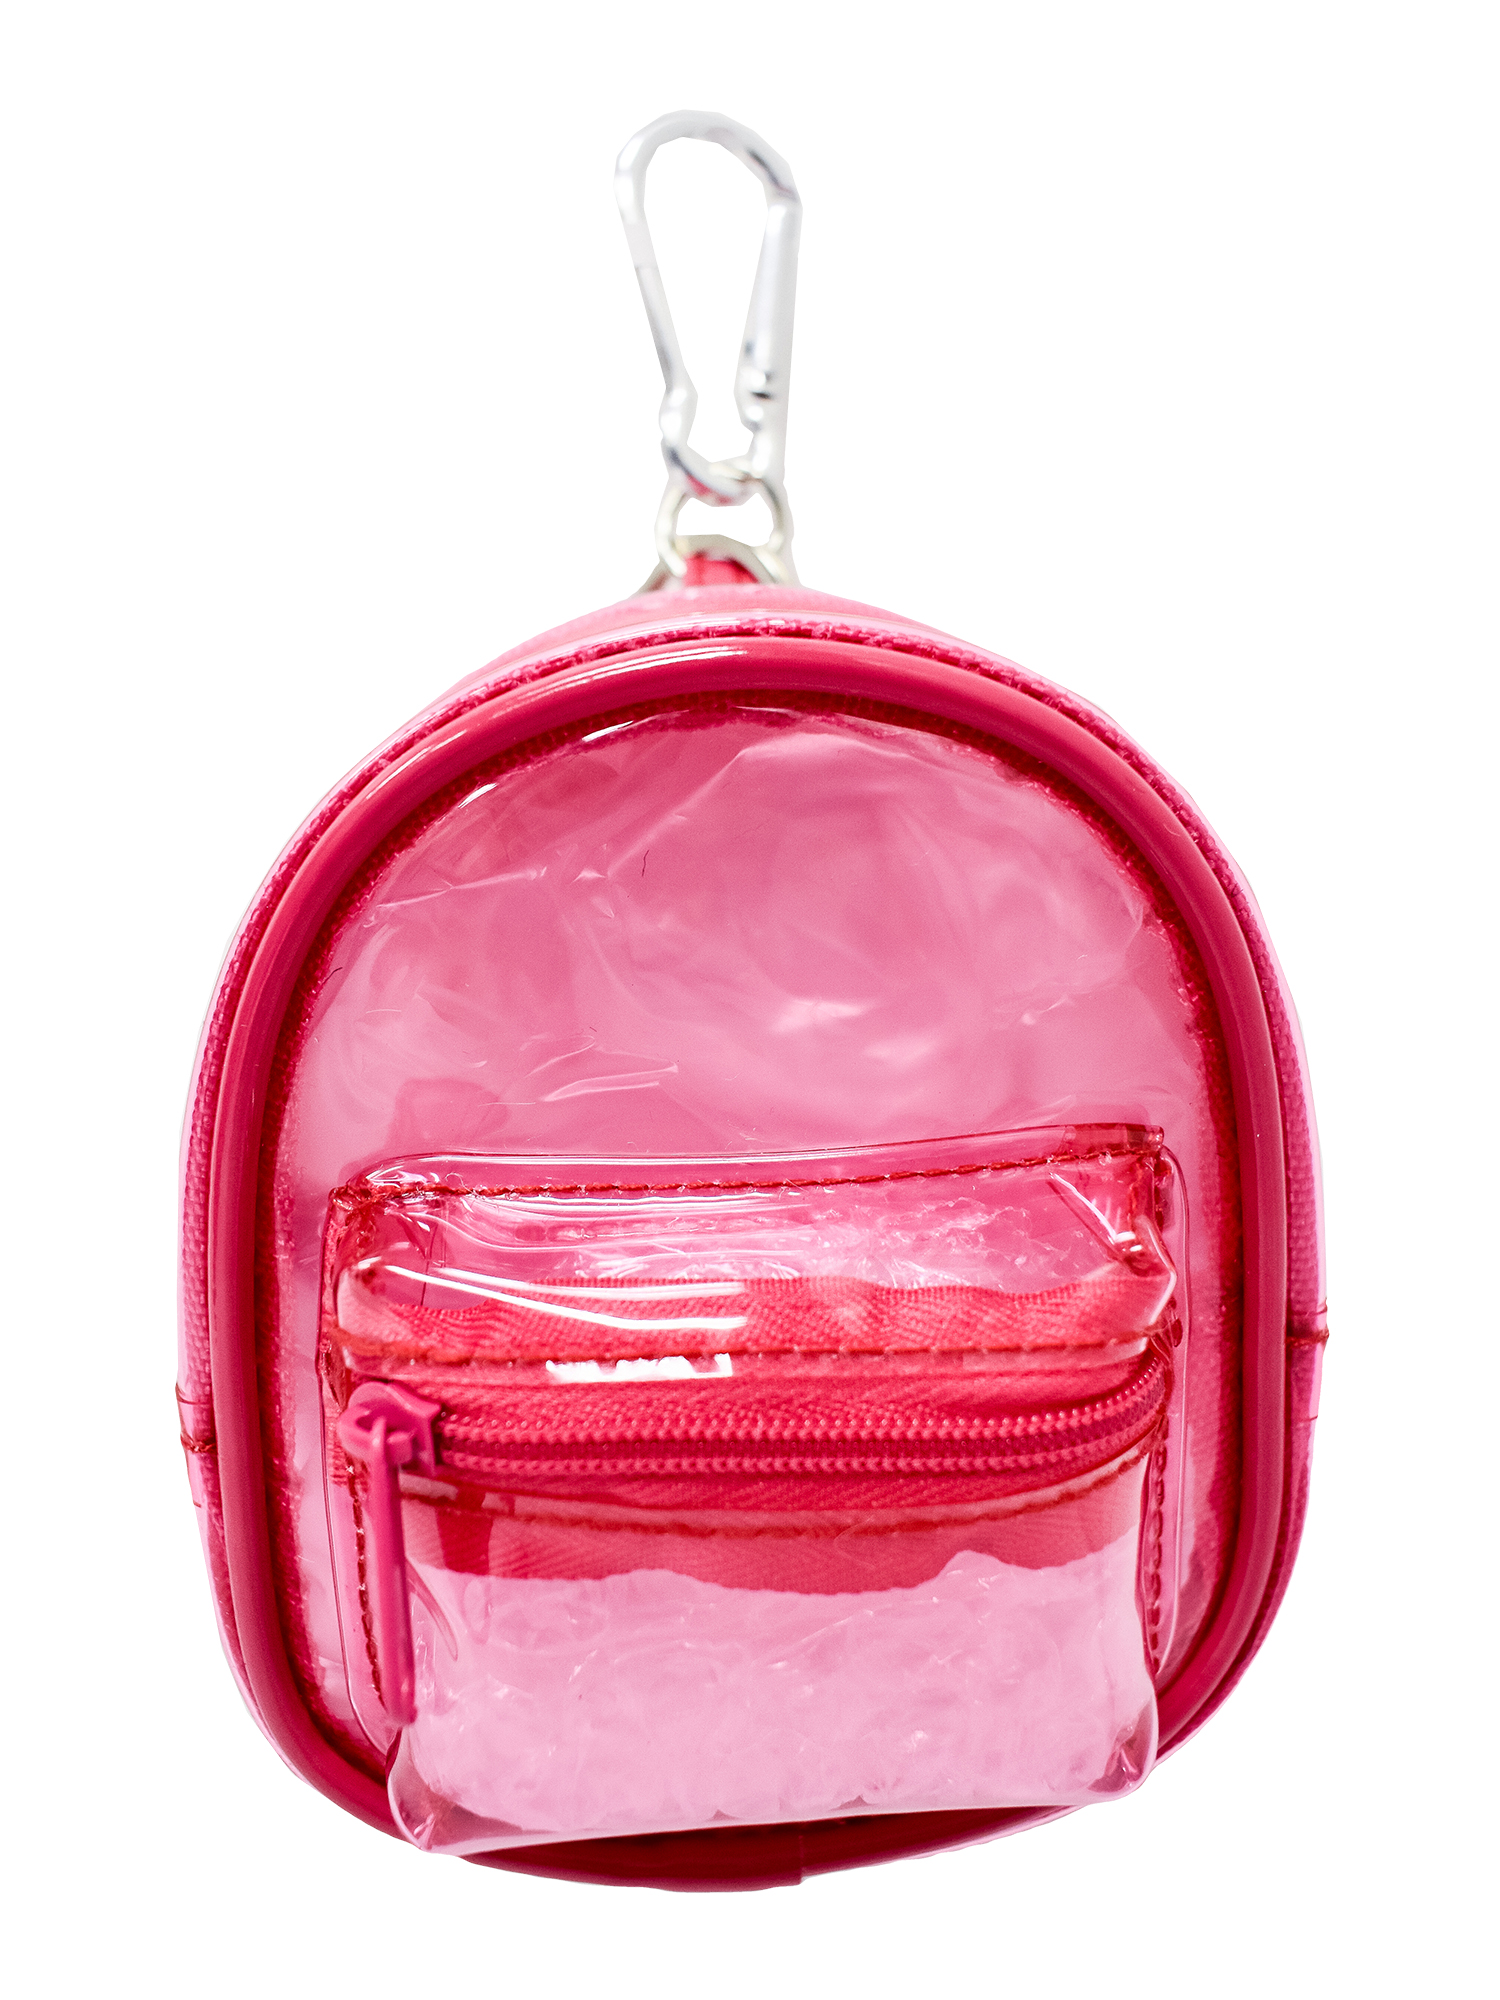 Claire's Girls Clear Pink Mini Backpack Keychain, Cute Gift, 76113